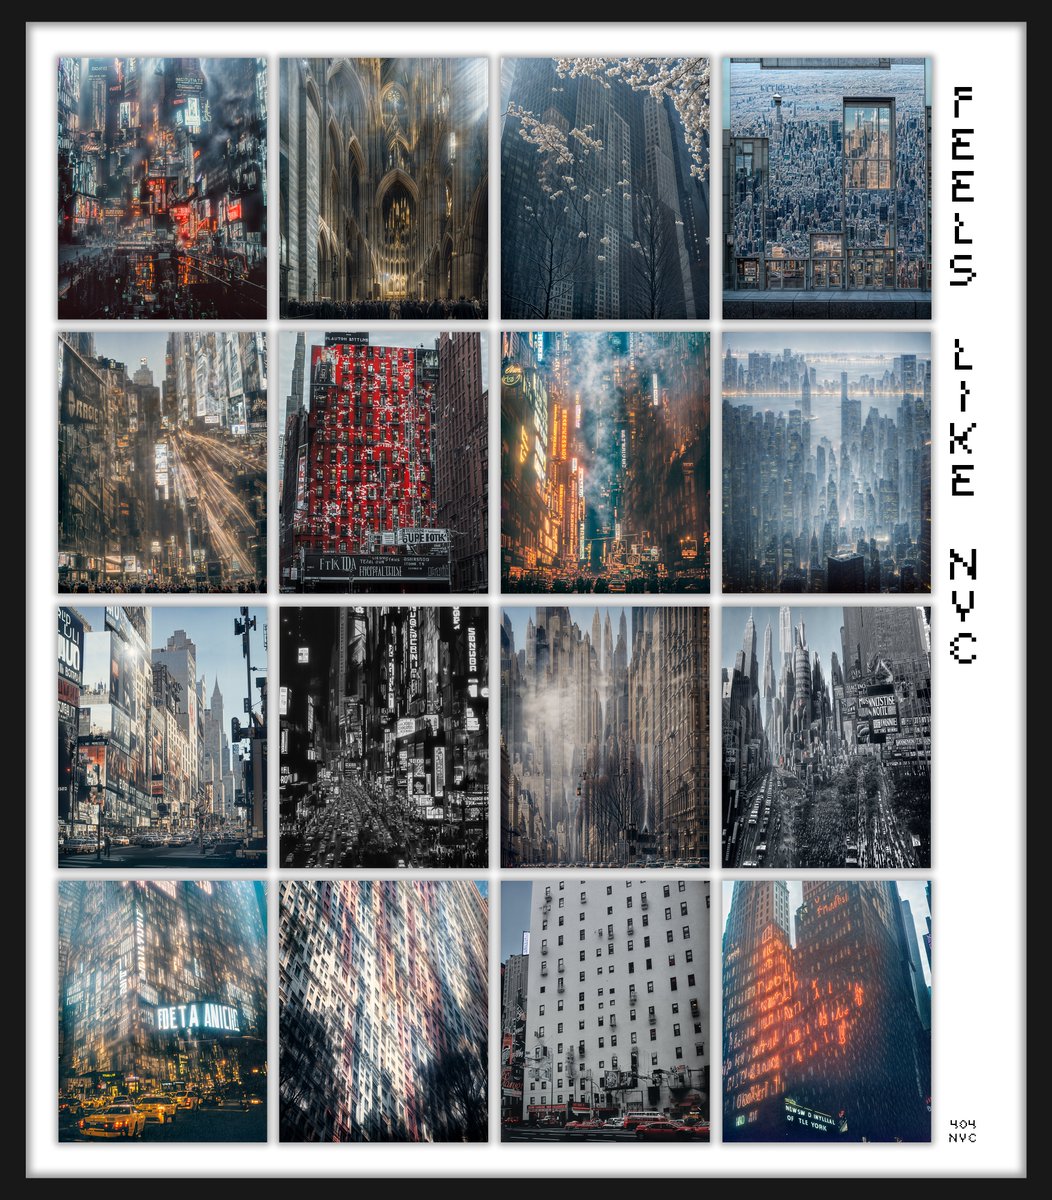 Each FLNYC artwork serves as a window into the vibrant yet paradoxical soul of the city. Skyscrapers soar amidst fragmented cityscapes, while bustling streets teem with ghostly figures and surreal anomalies.